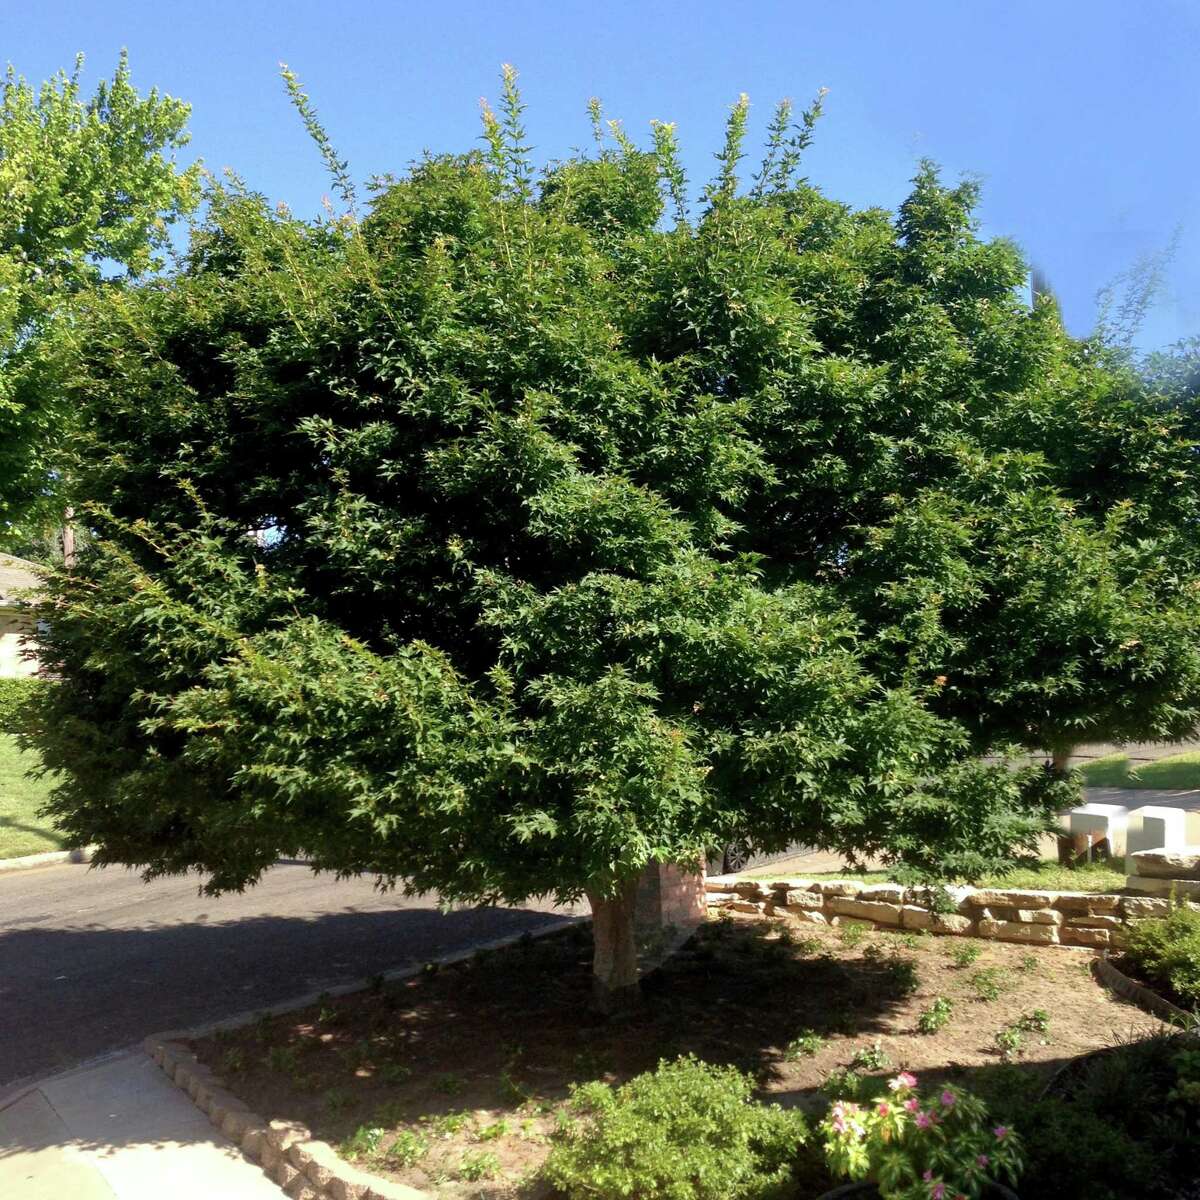 Maples are one of the most desirable group of shade trees in most regions of the nation, but in the Southwest, it is generally a waste of time to plant them. They don’t survive our alkaline soils and hot dry weather.